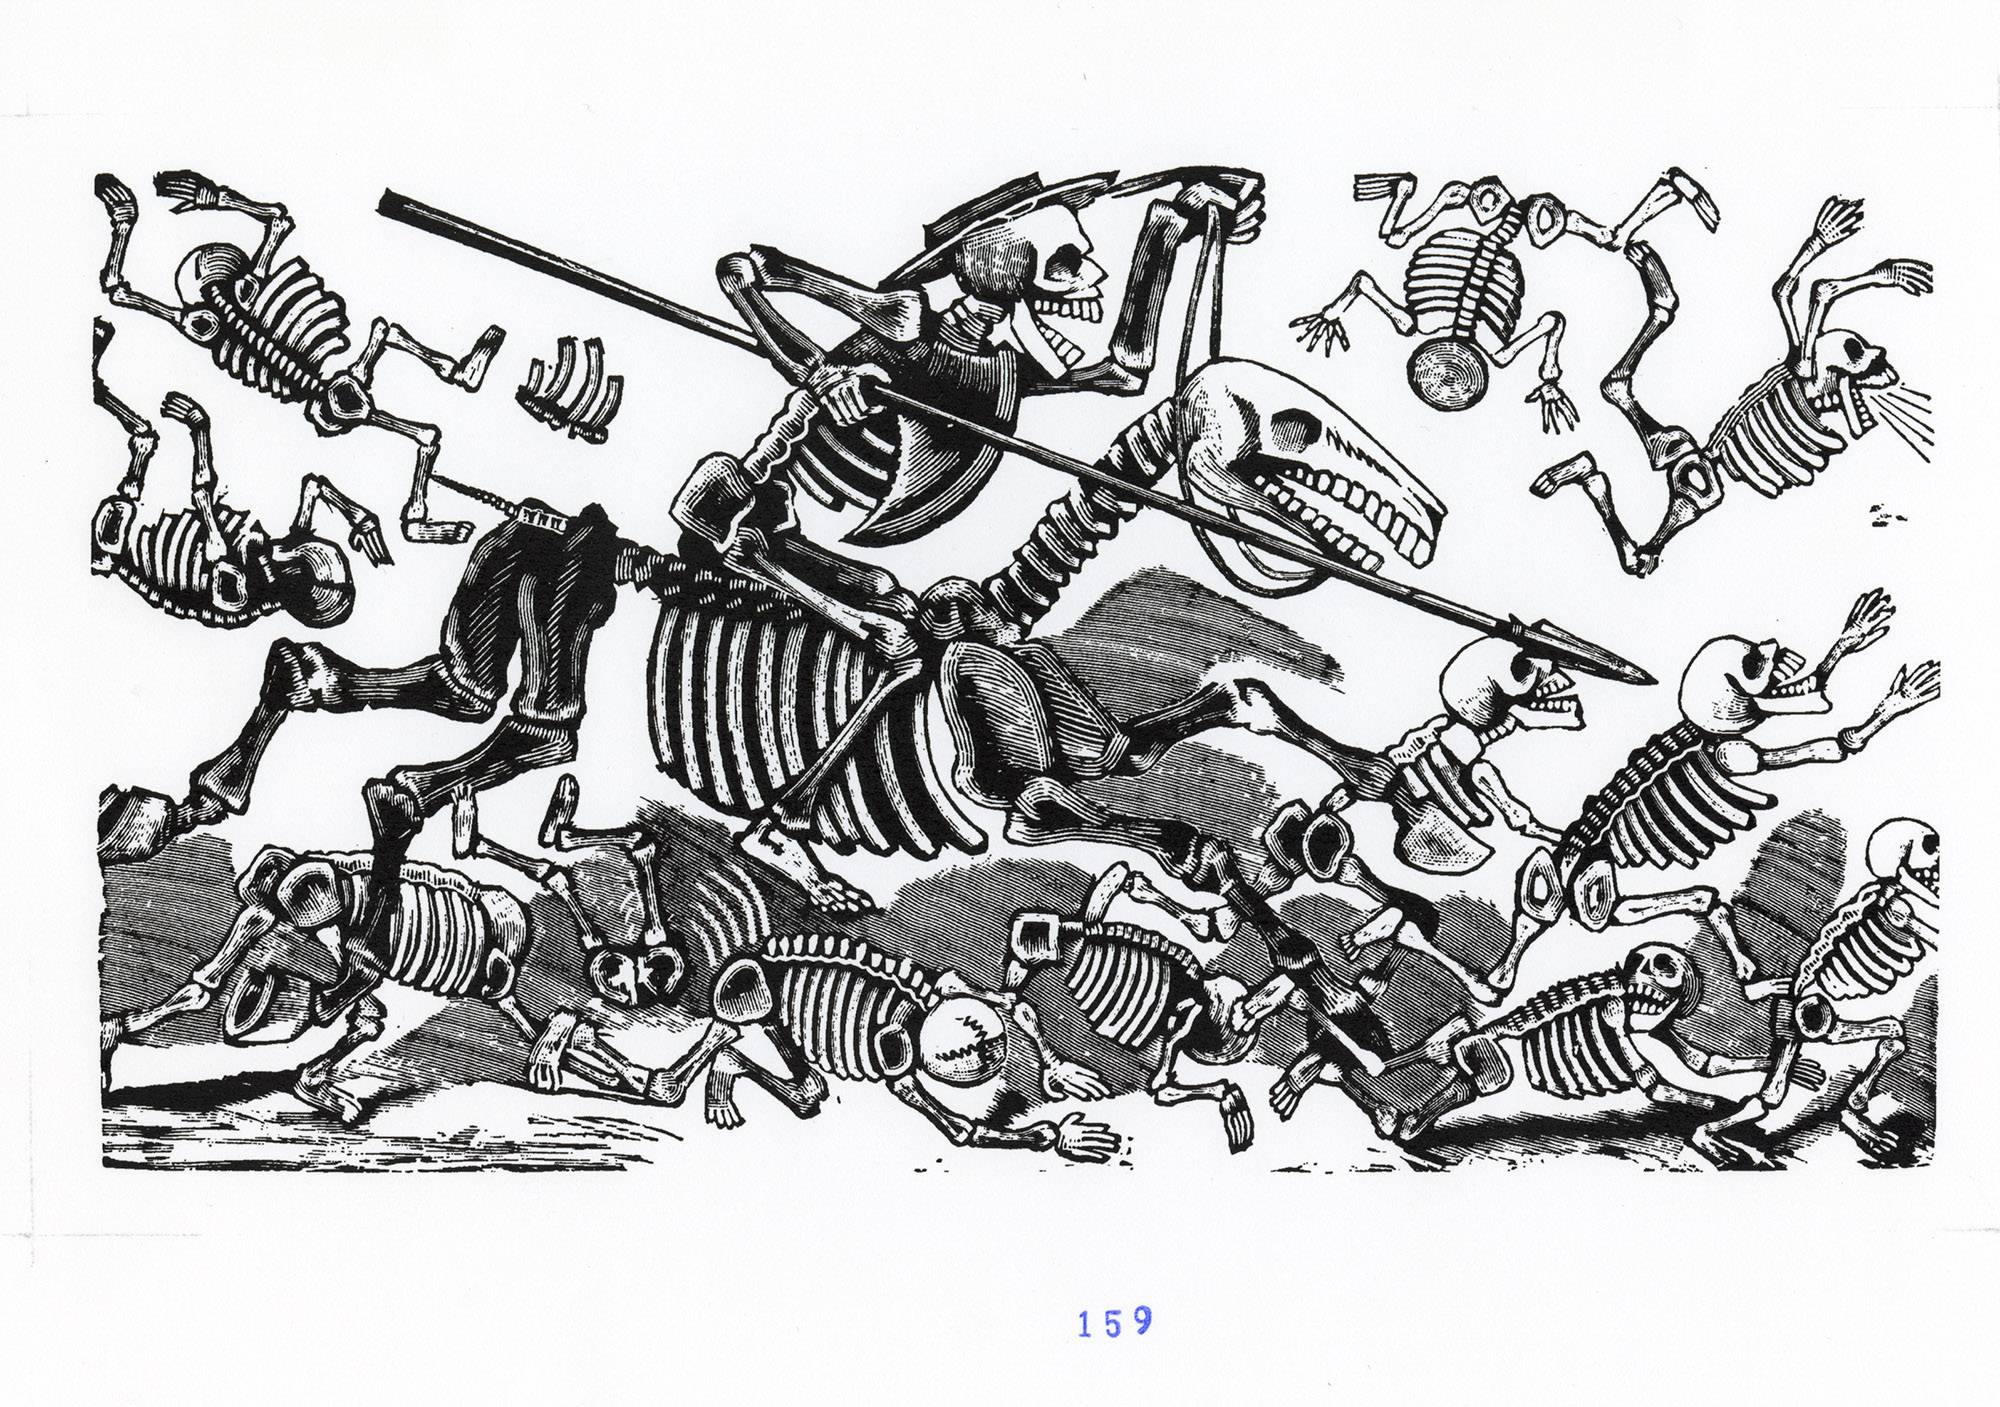 a skeleton wearing a hat and holding a spear riding a horse skeleton, surrounded by tons of little skeletons running on their hands and feet, some are being trampled by the horse